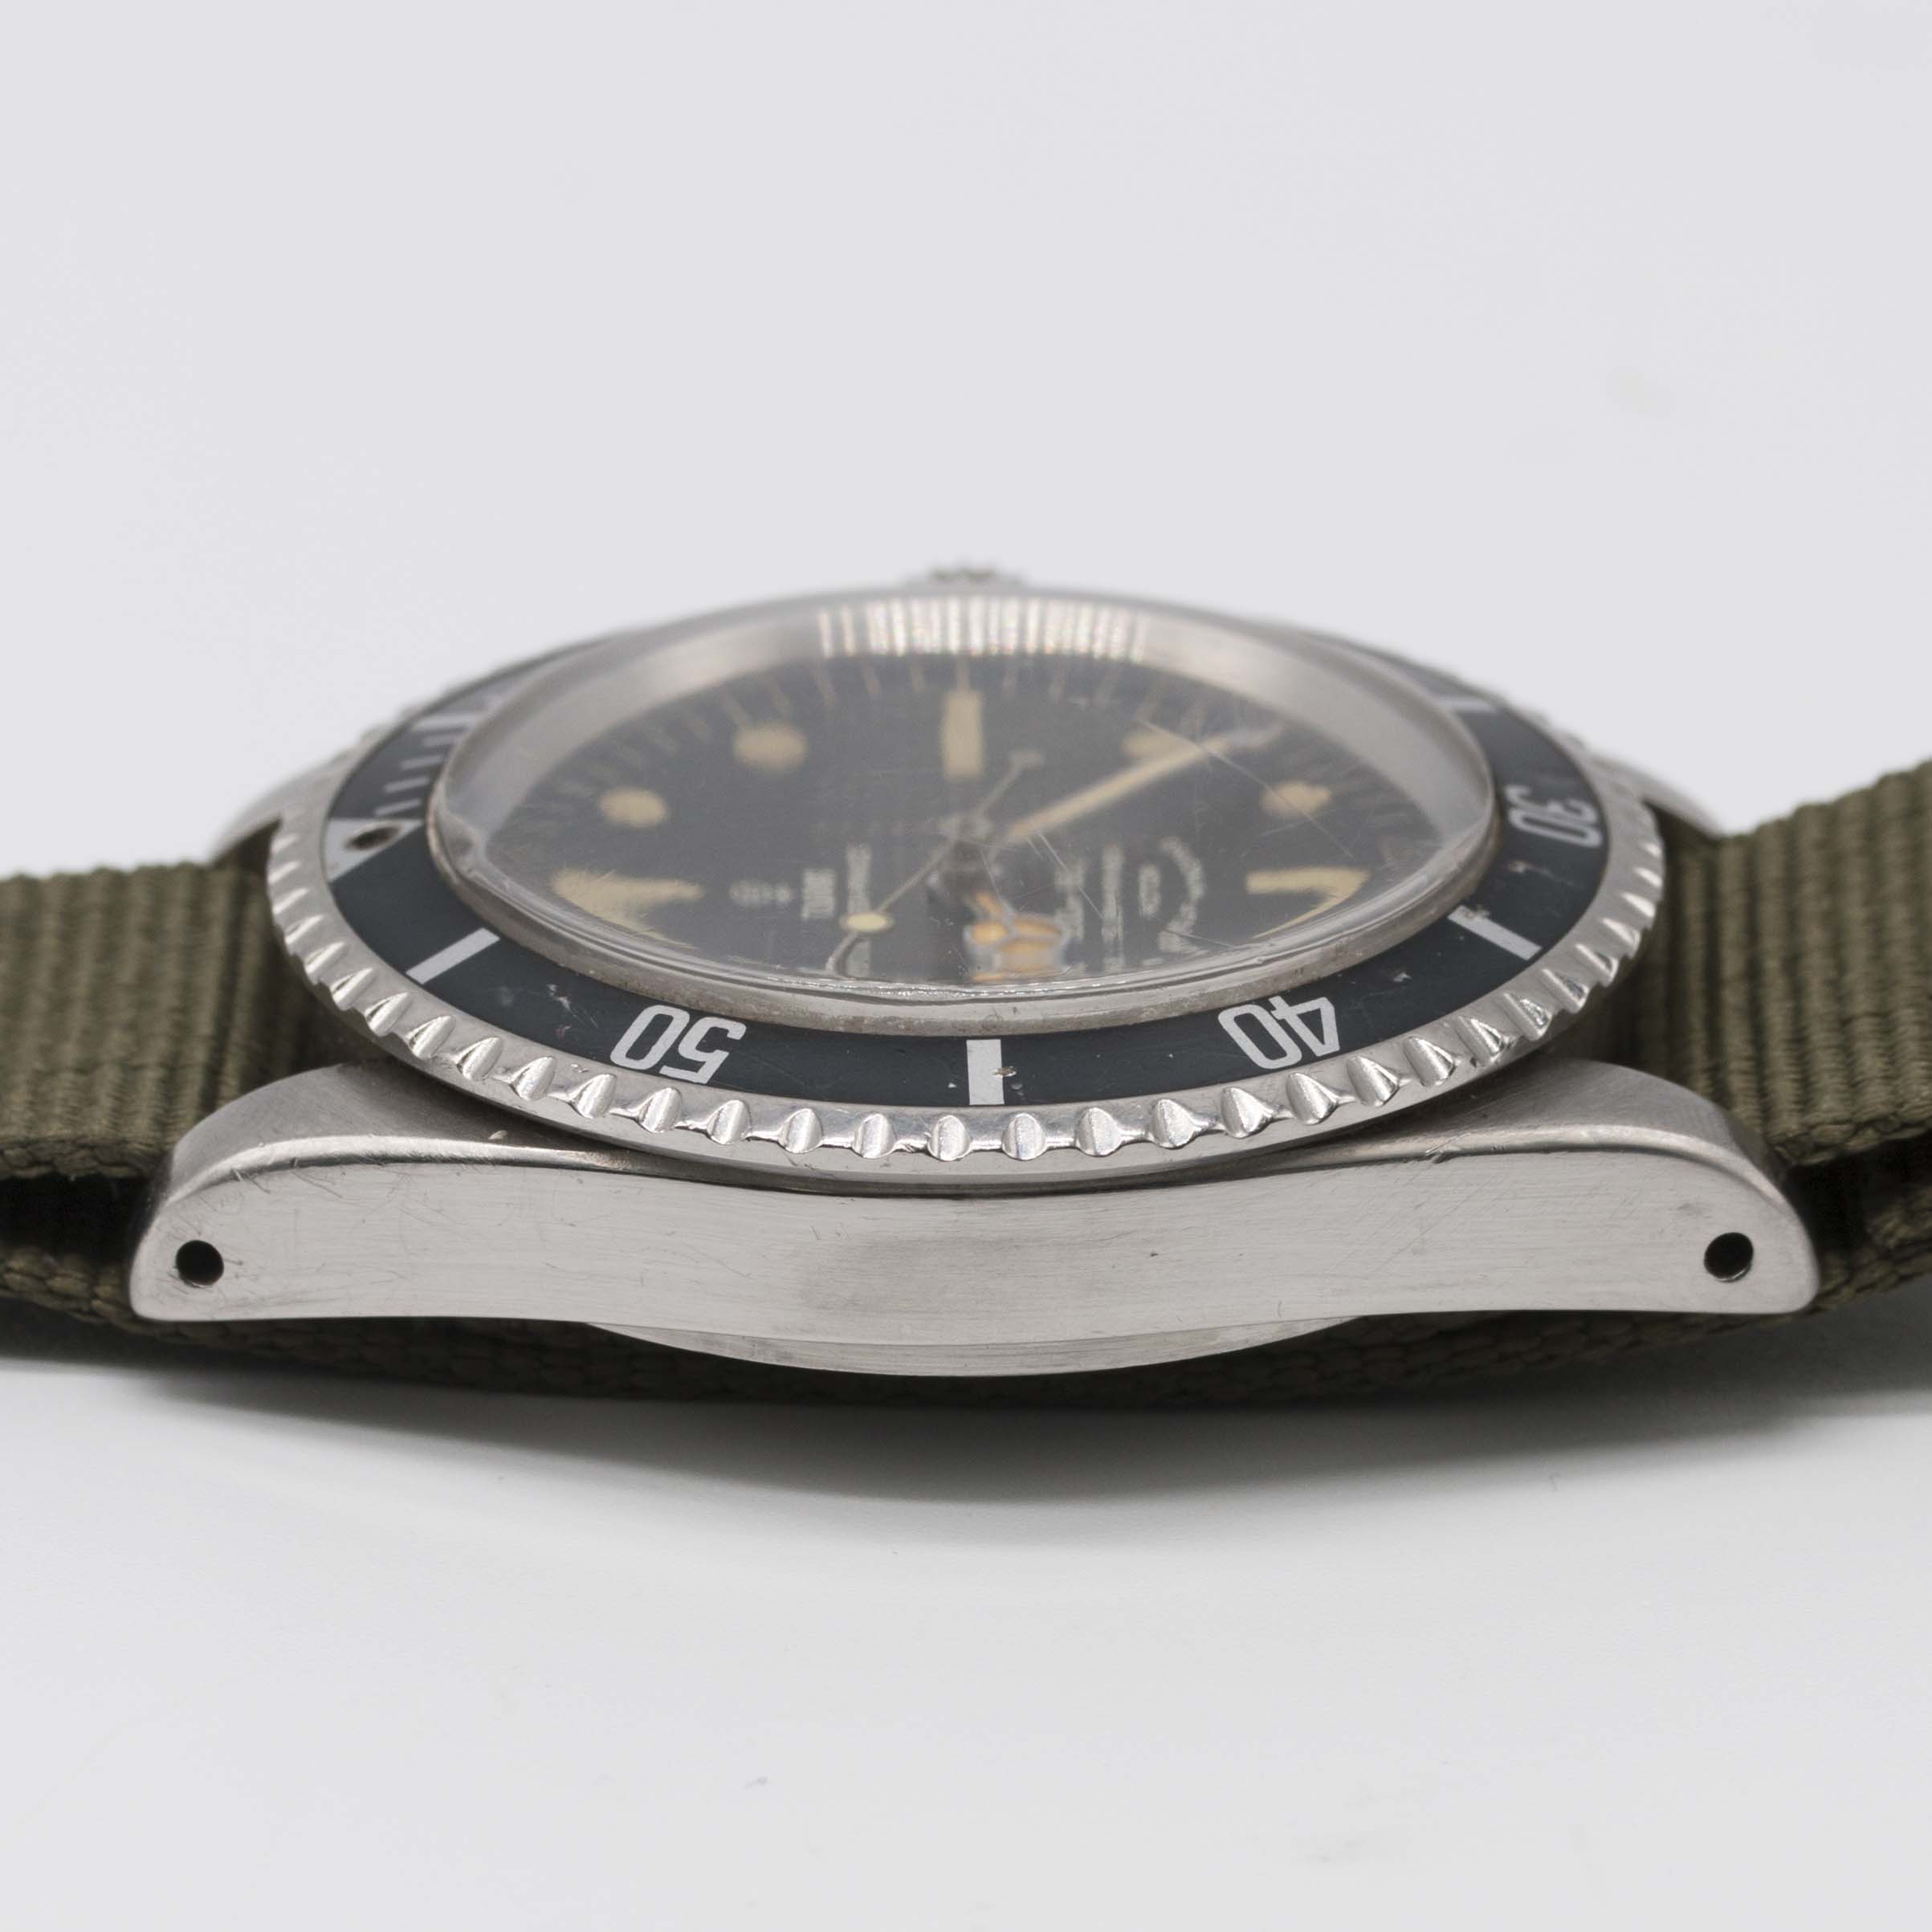 A GENTLEMAN'S STAINLESS STEEL ROLEX TUDOR OYSTER PRINCE SUBMARINER WRIST WATCH CIRCA 1967, REF. - Image 10 of 10